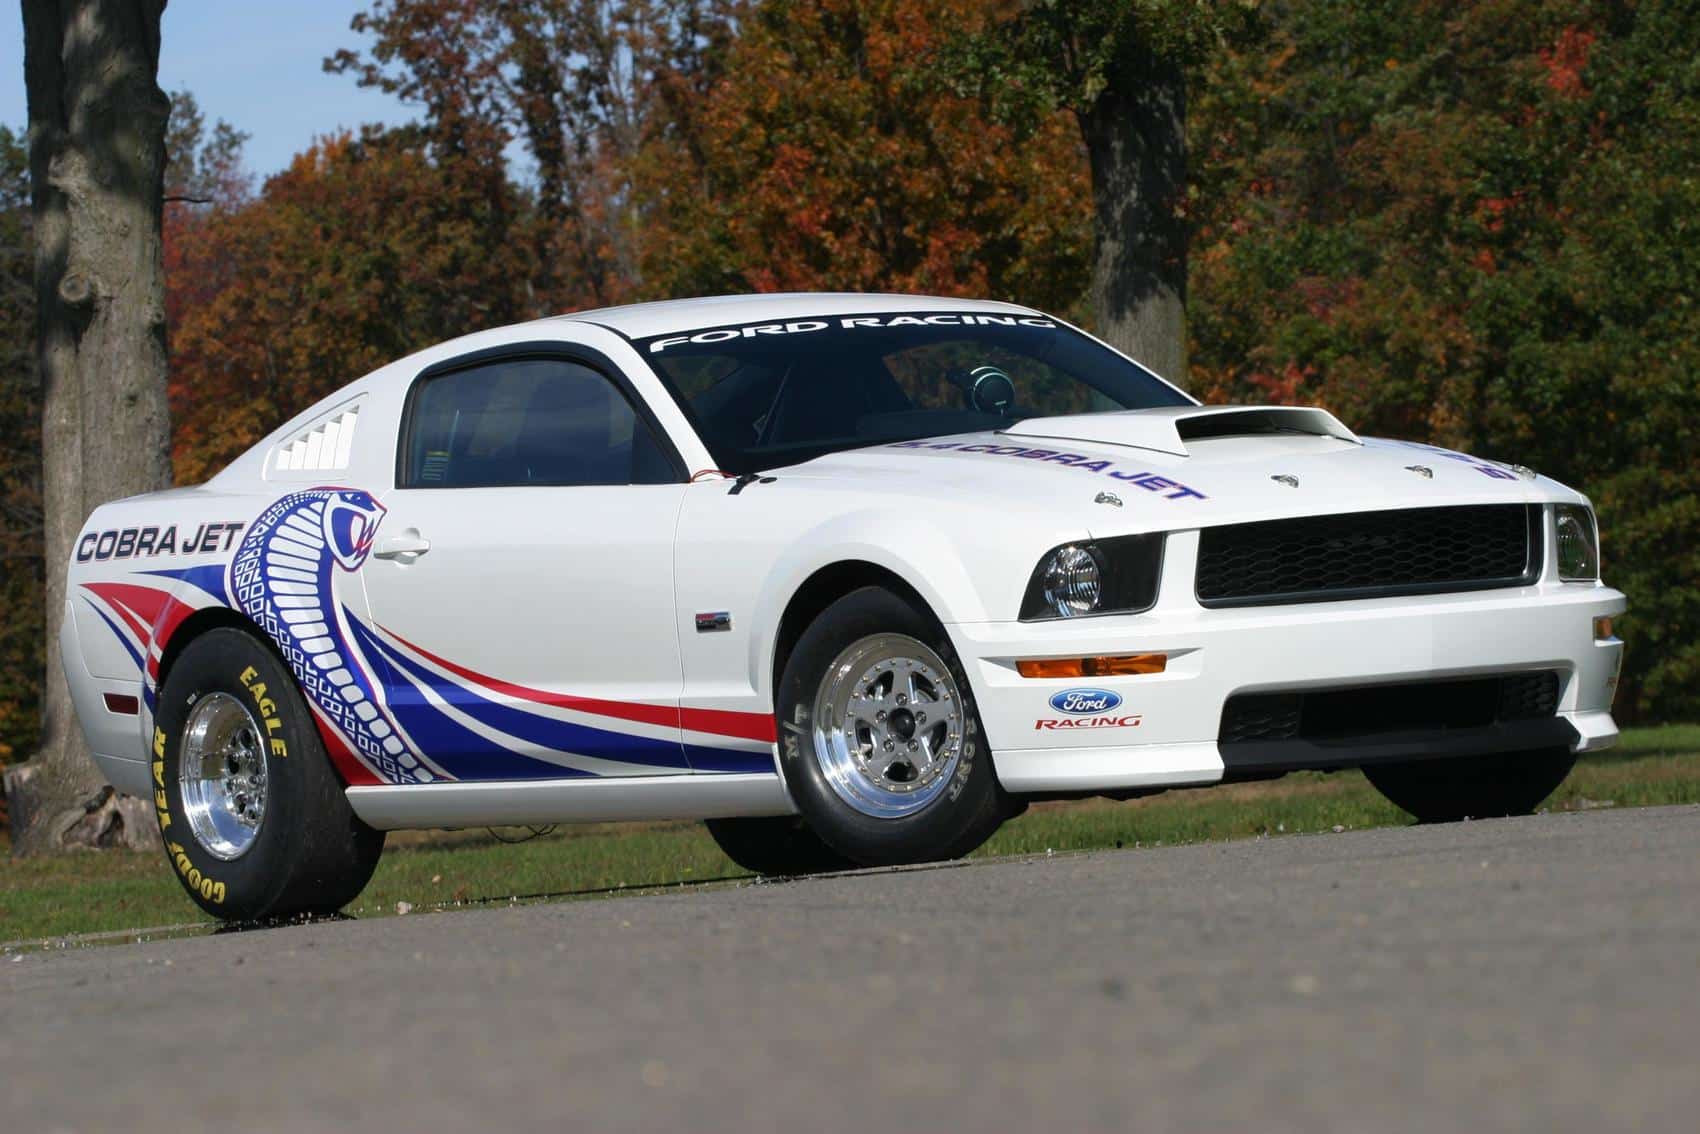 2008 Cobra Jet Mustang Officially Unveiled at SEMA, Las Vegas